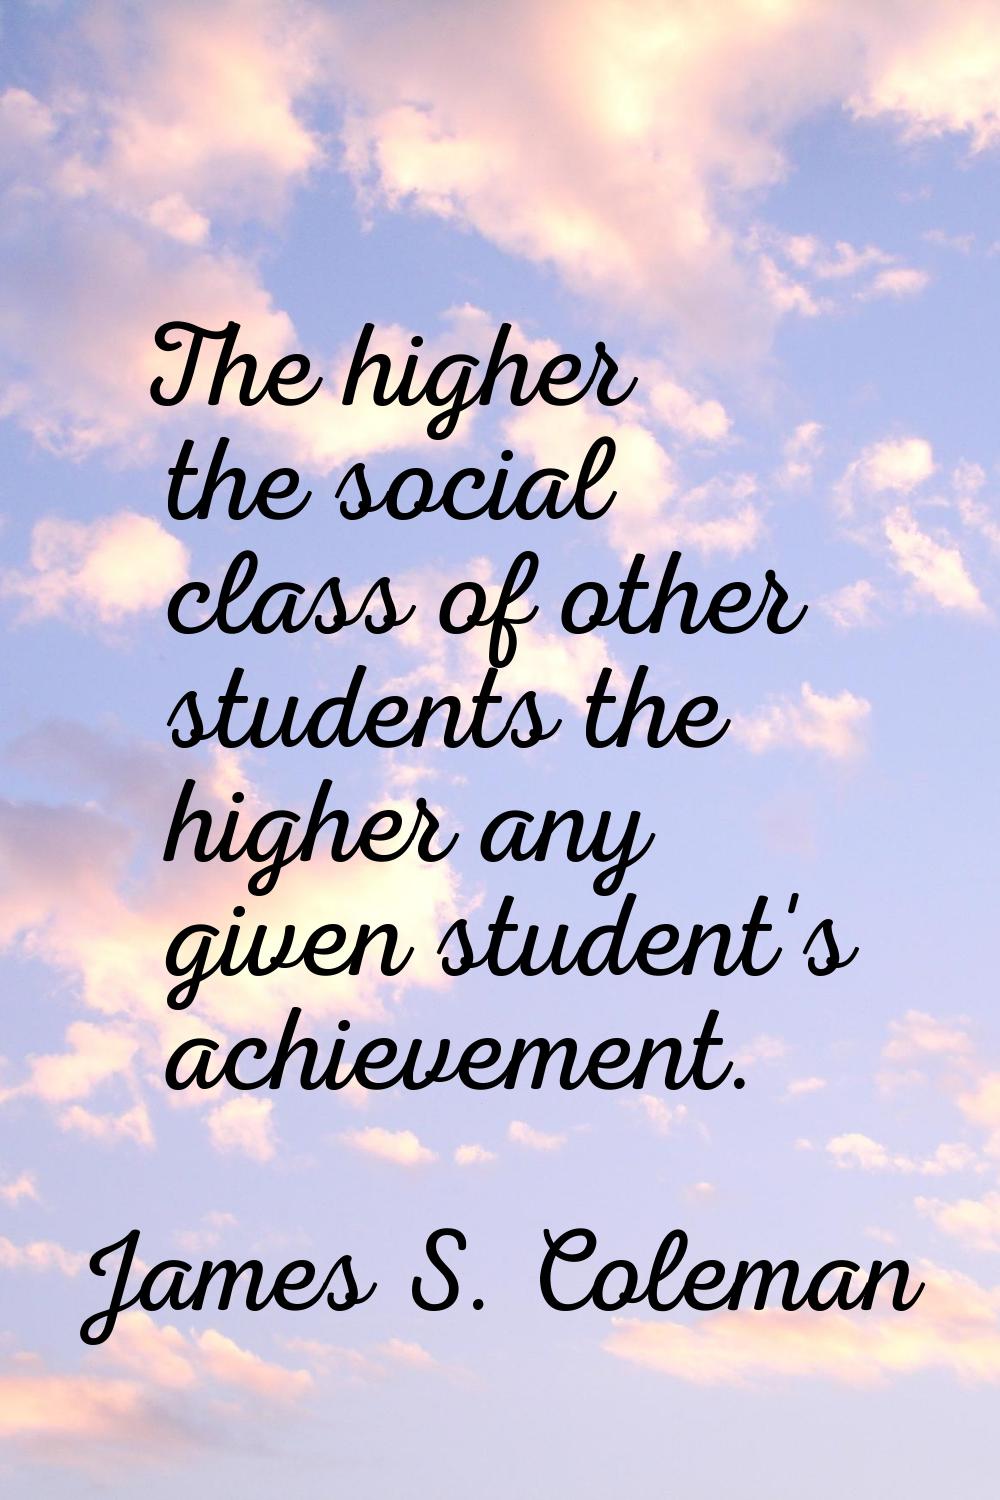 The higher the social class of other students the higher any given student's achievement.